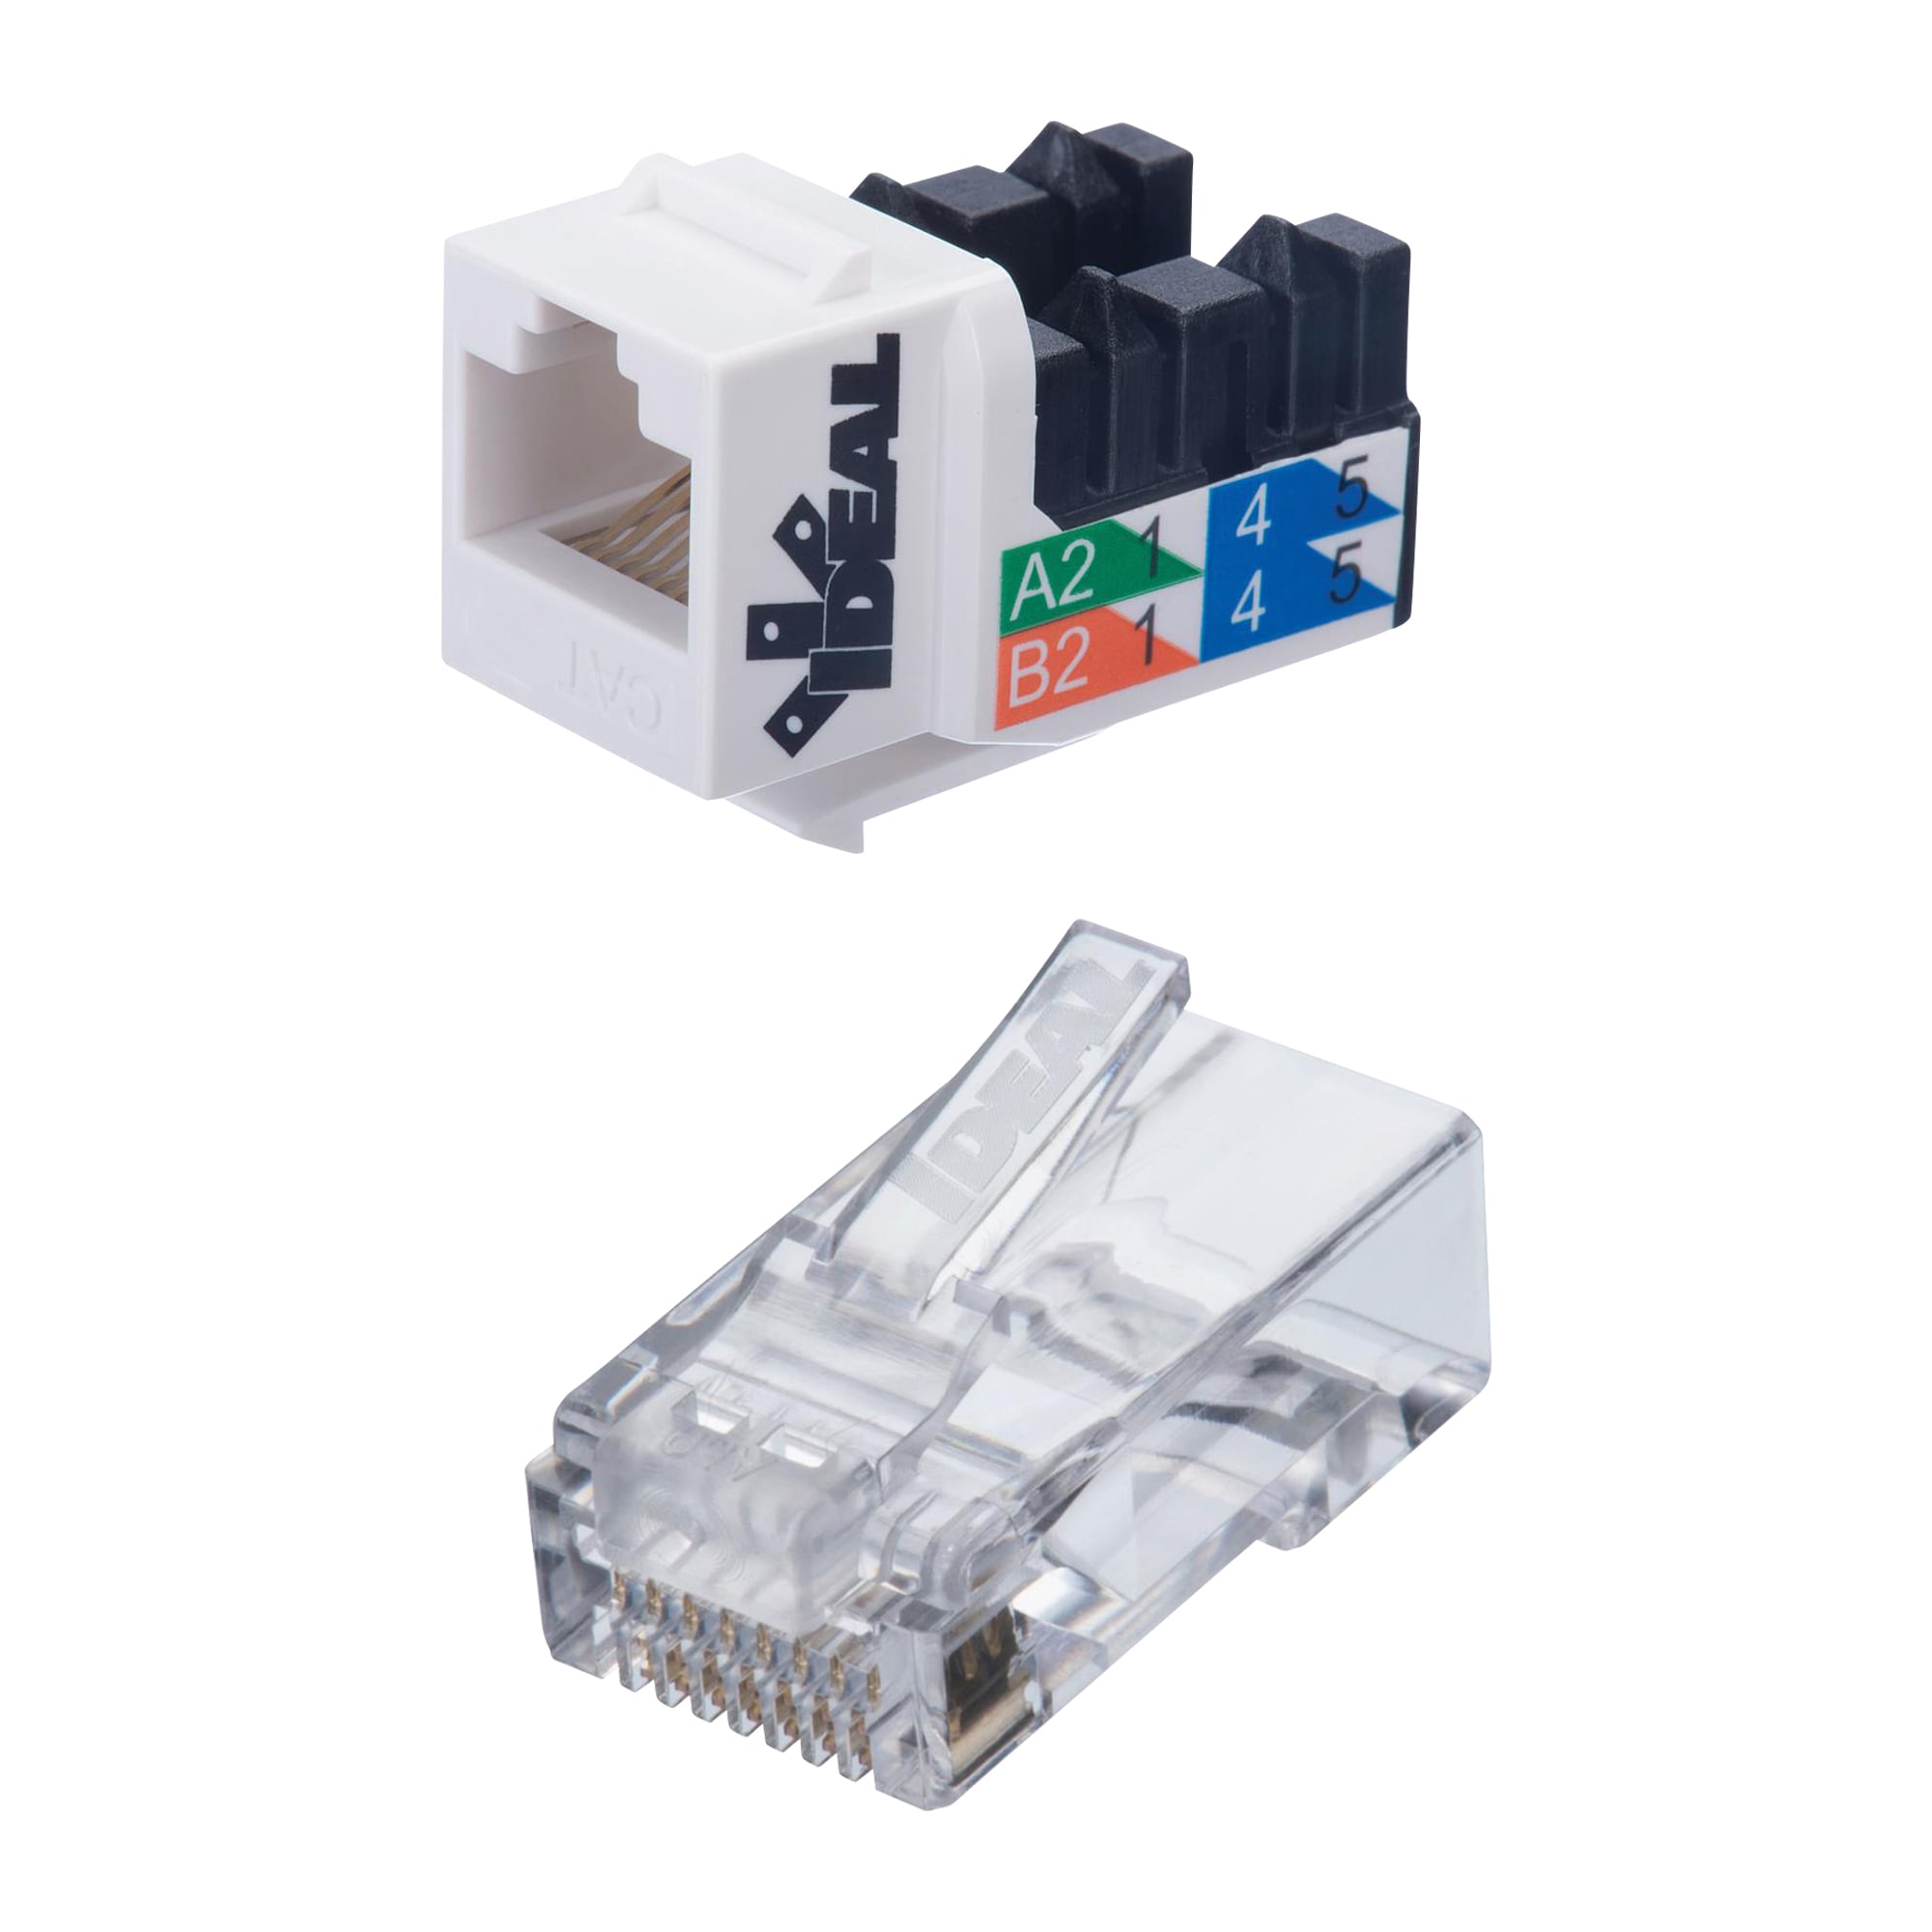 IDEAL IDEAL 10-Pack Cat6 Rj45 Idc Connector with 25-Pack Cat6 Rj45 Modular  Plug